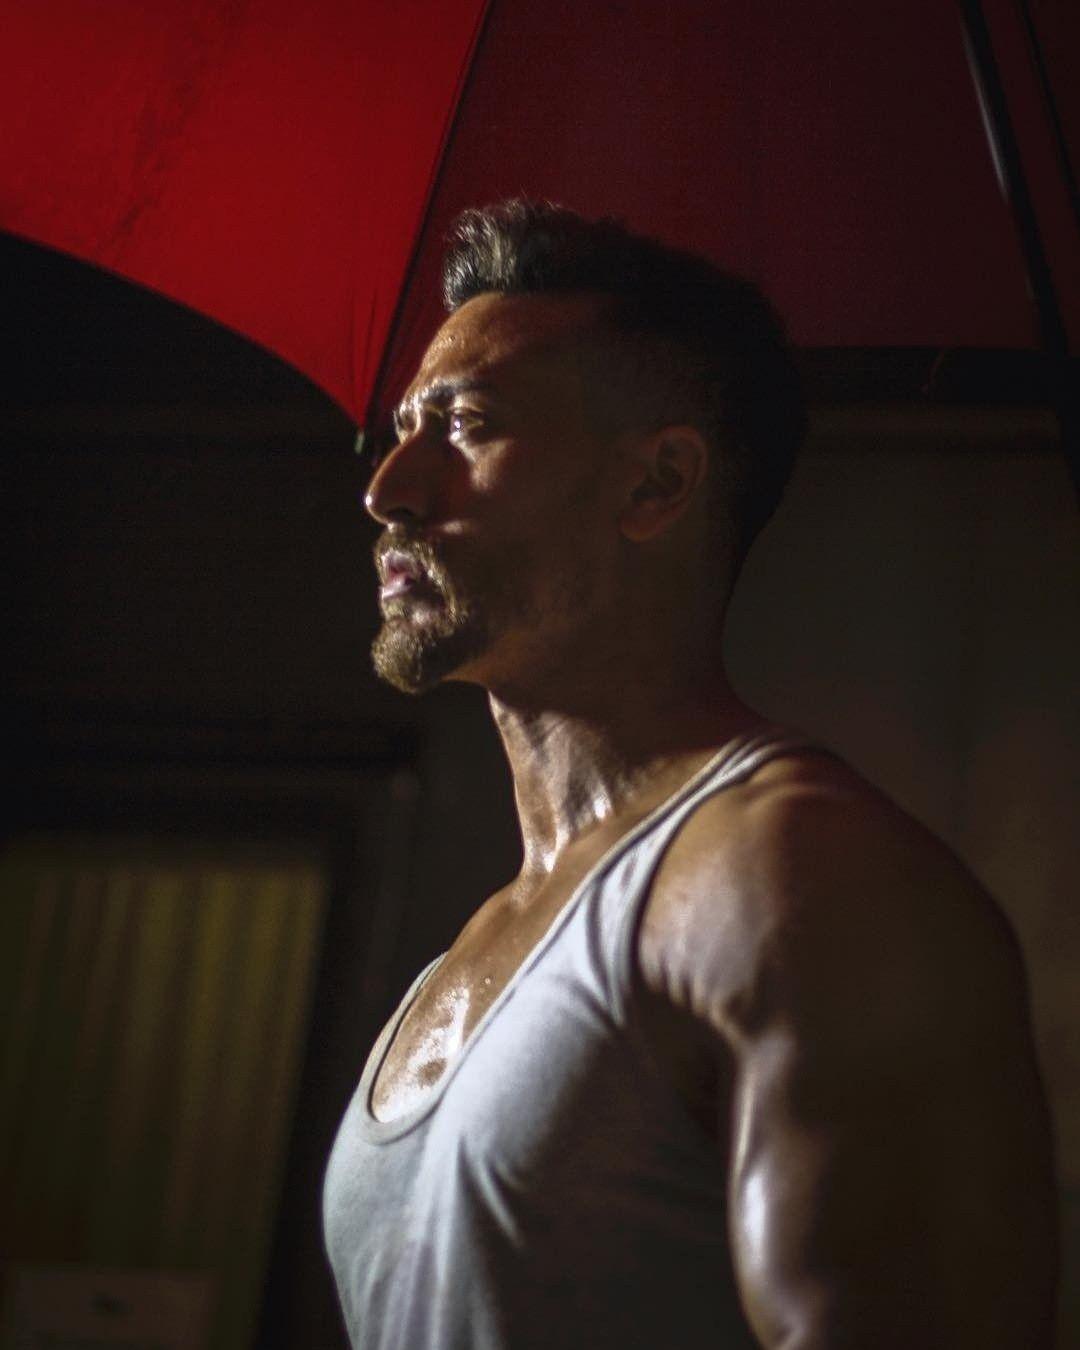 Tiger Shroff new look for Baaghi 2 movie Bollywood. Tiger shroff, Tiger shroff body, Actors